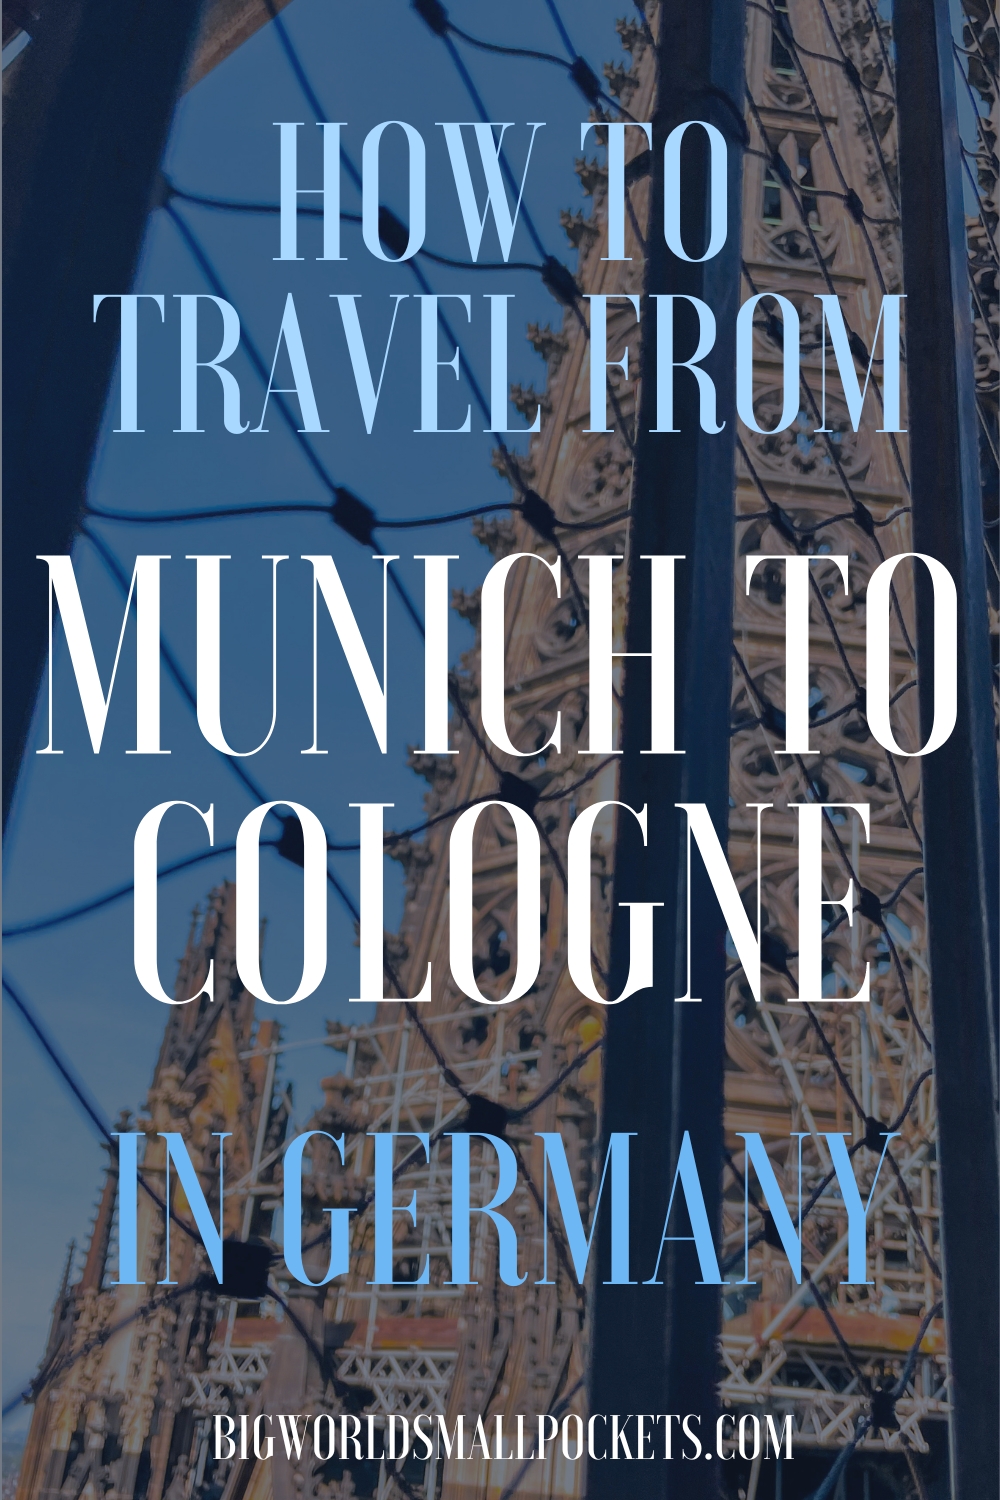 How Best to Travel from Munich to Cologne in Germany